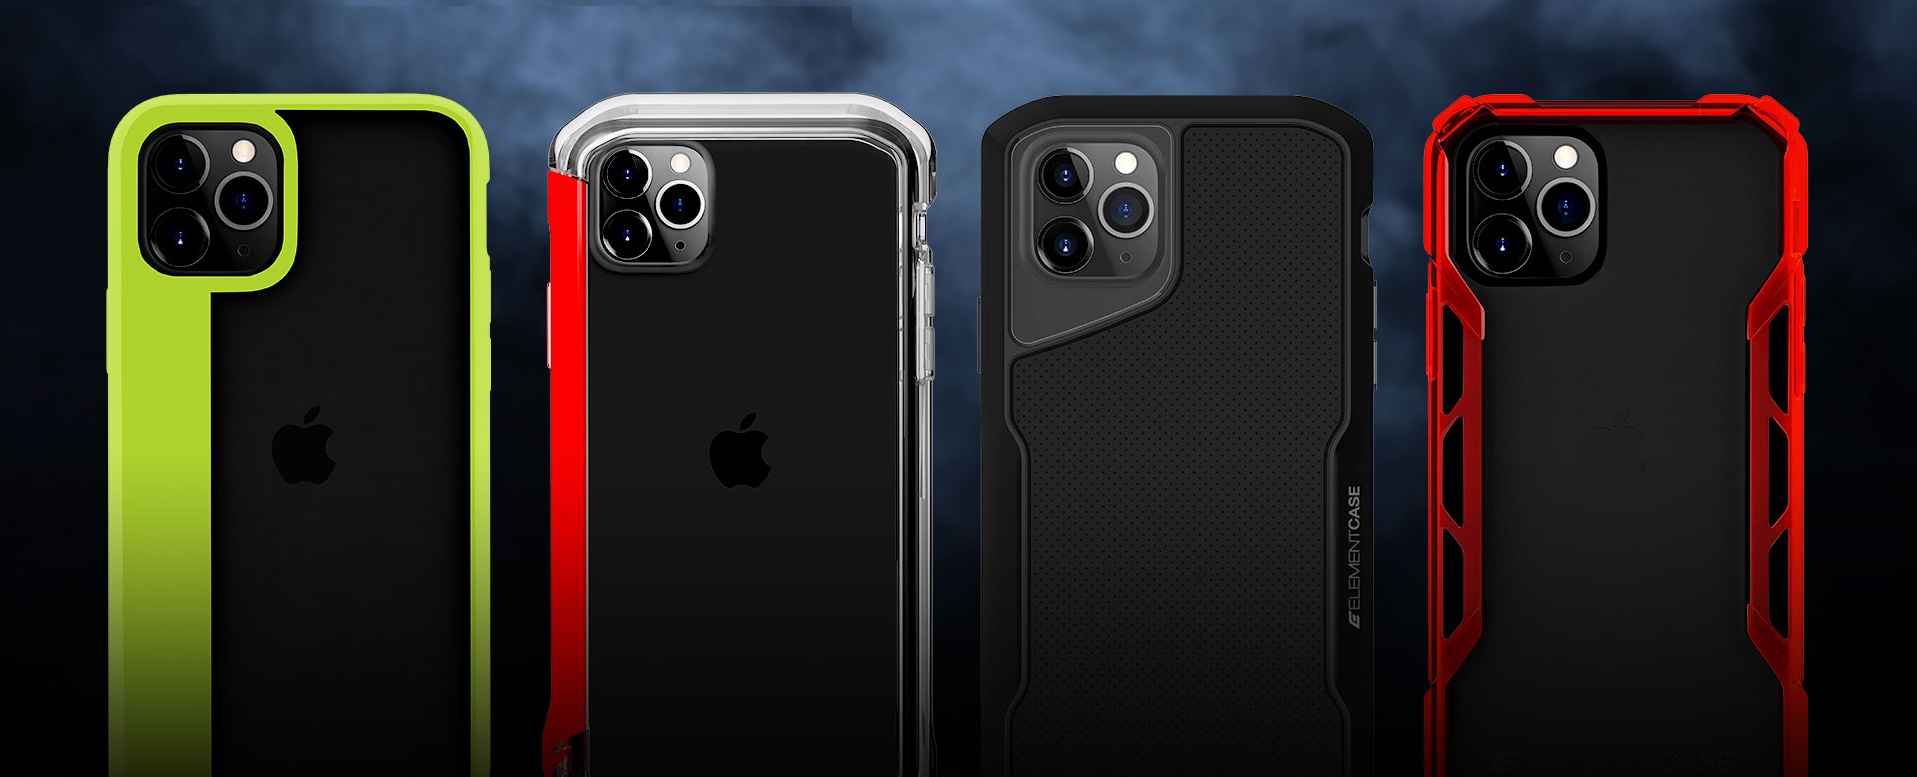 element-case-announces-x2-collection-of-cases-for-the-new-apple-iphone-11-series-in-india